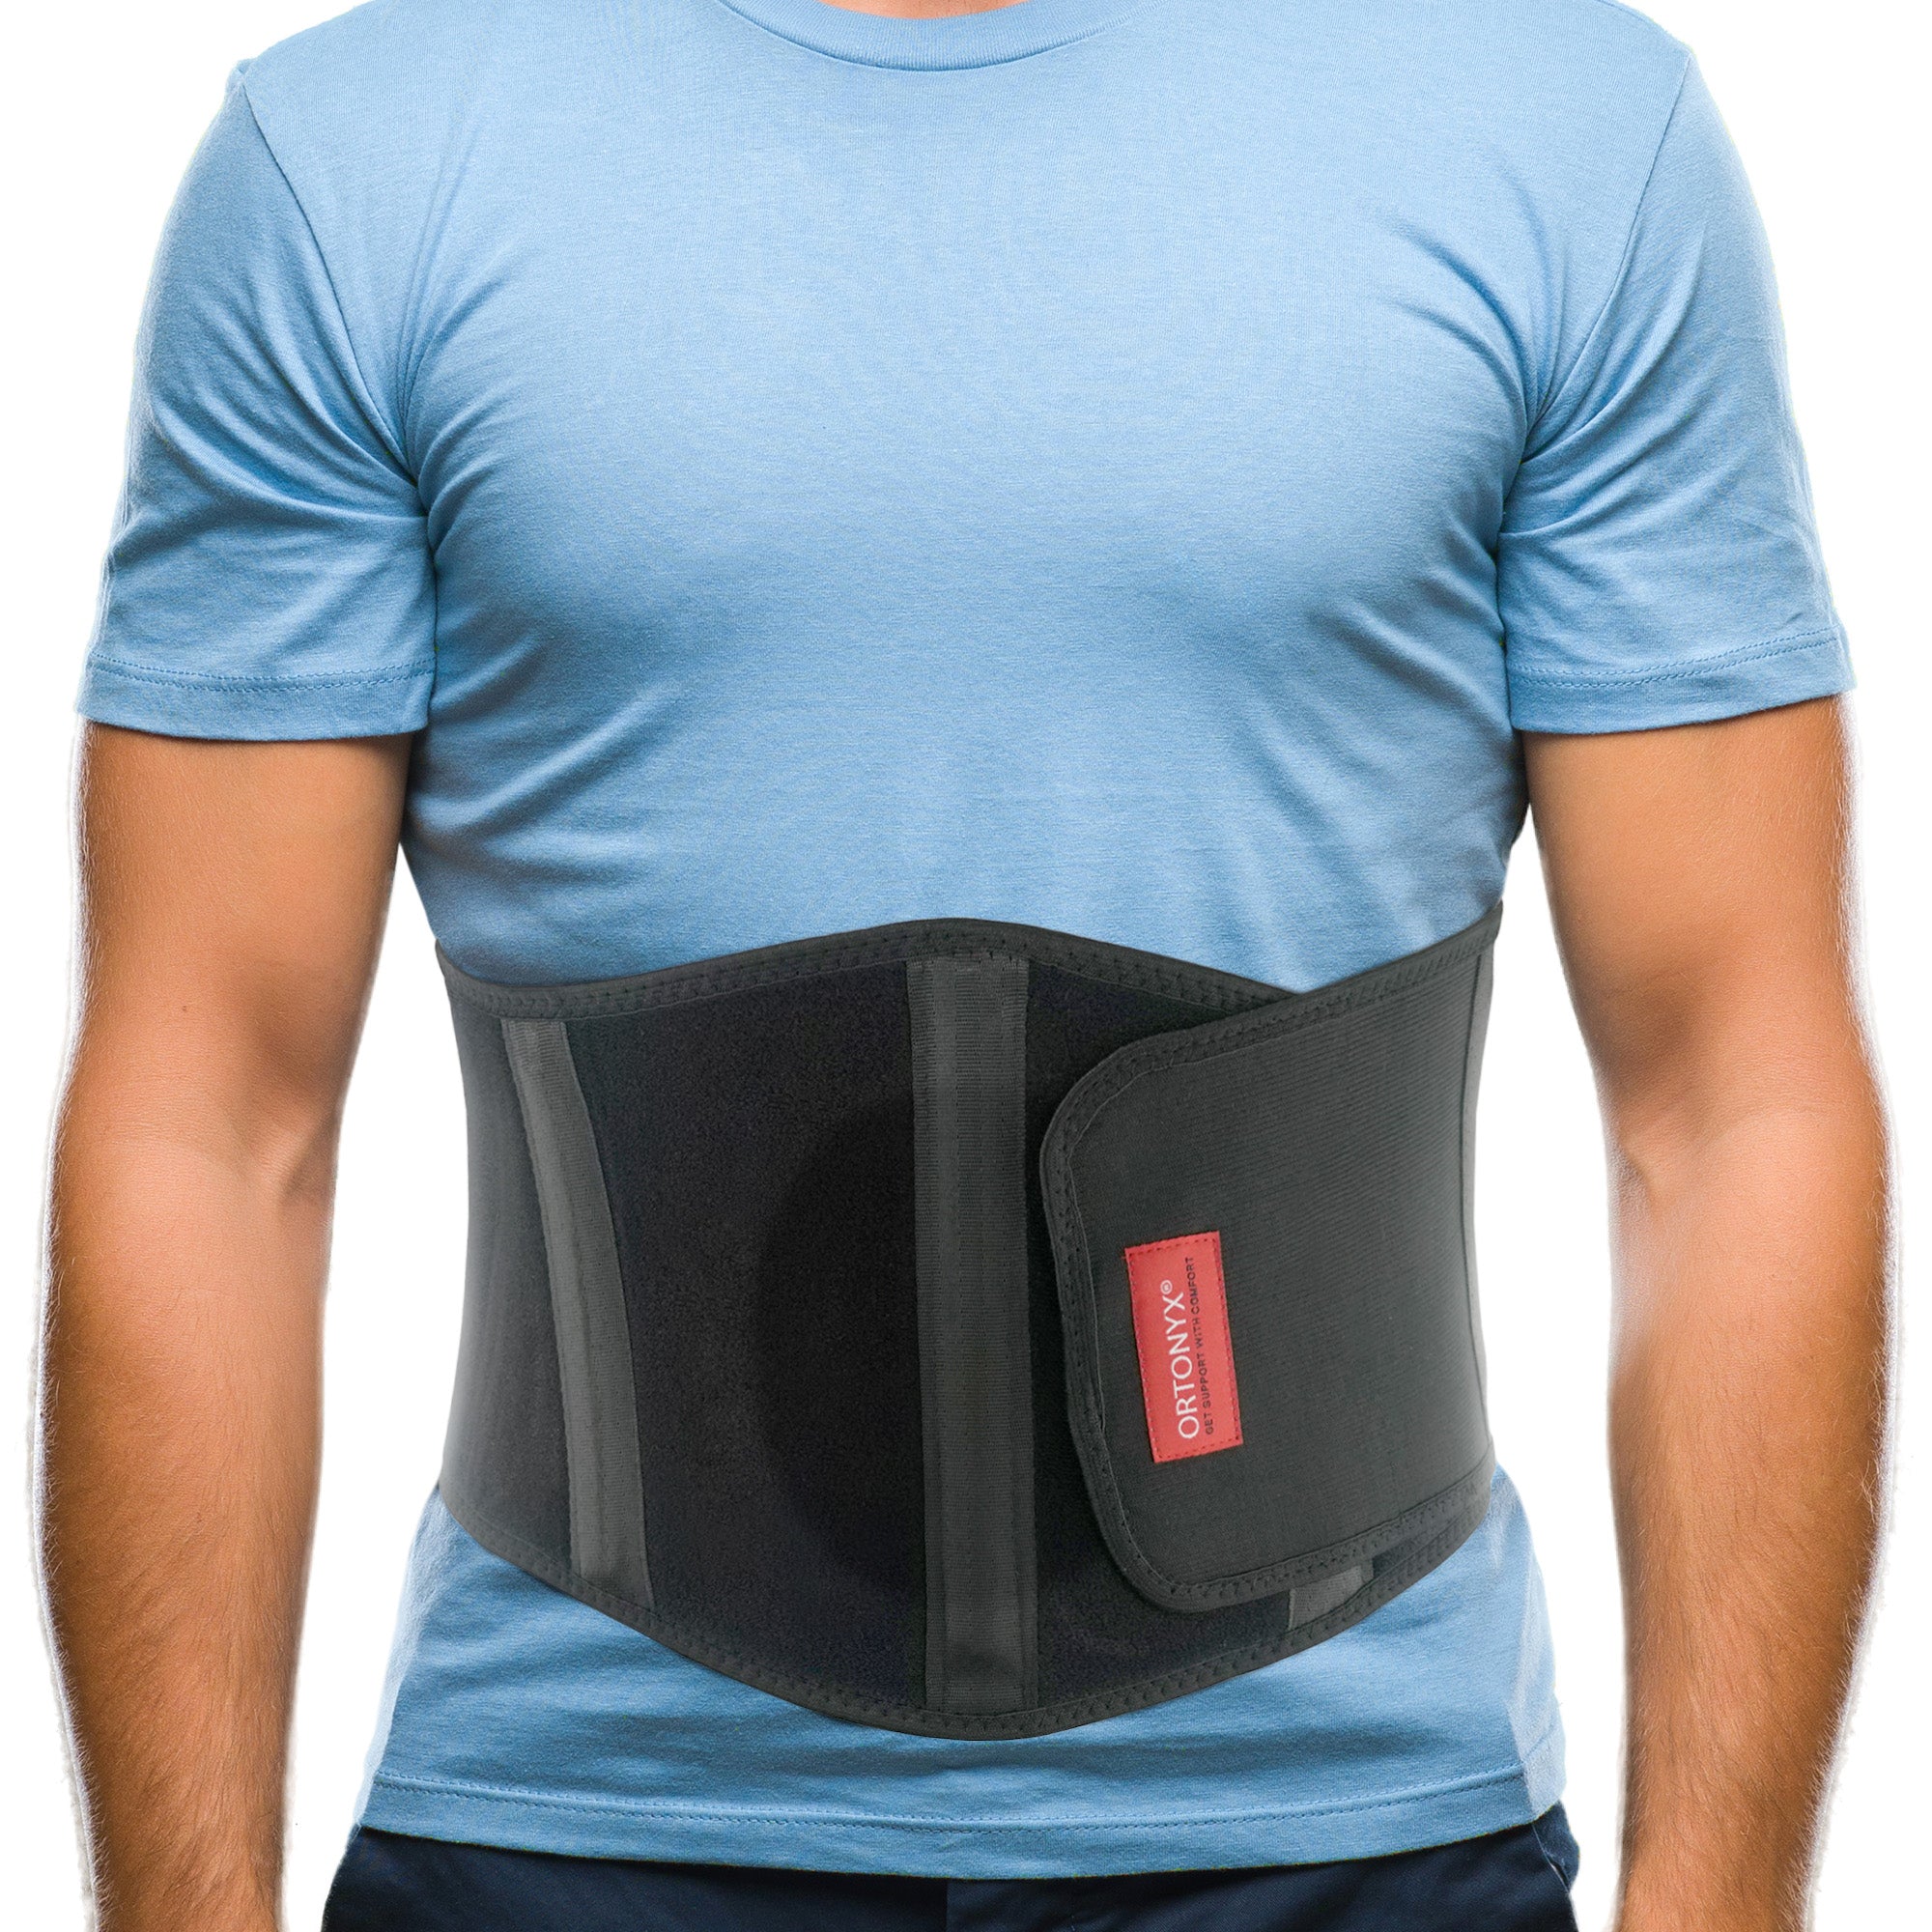 Umbilical Hernia Support Belt I Relieves Pain And Discomfort For